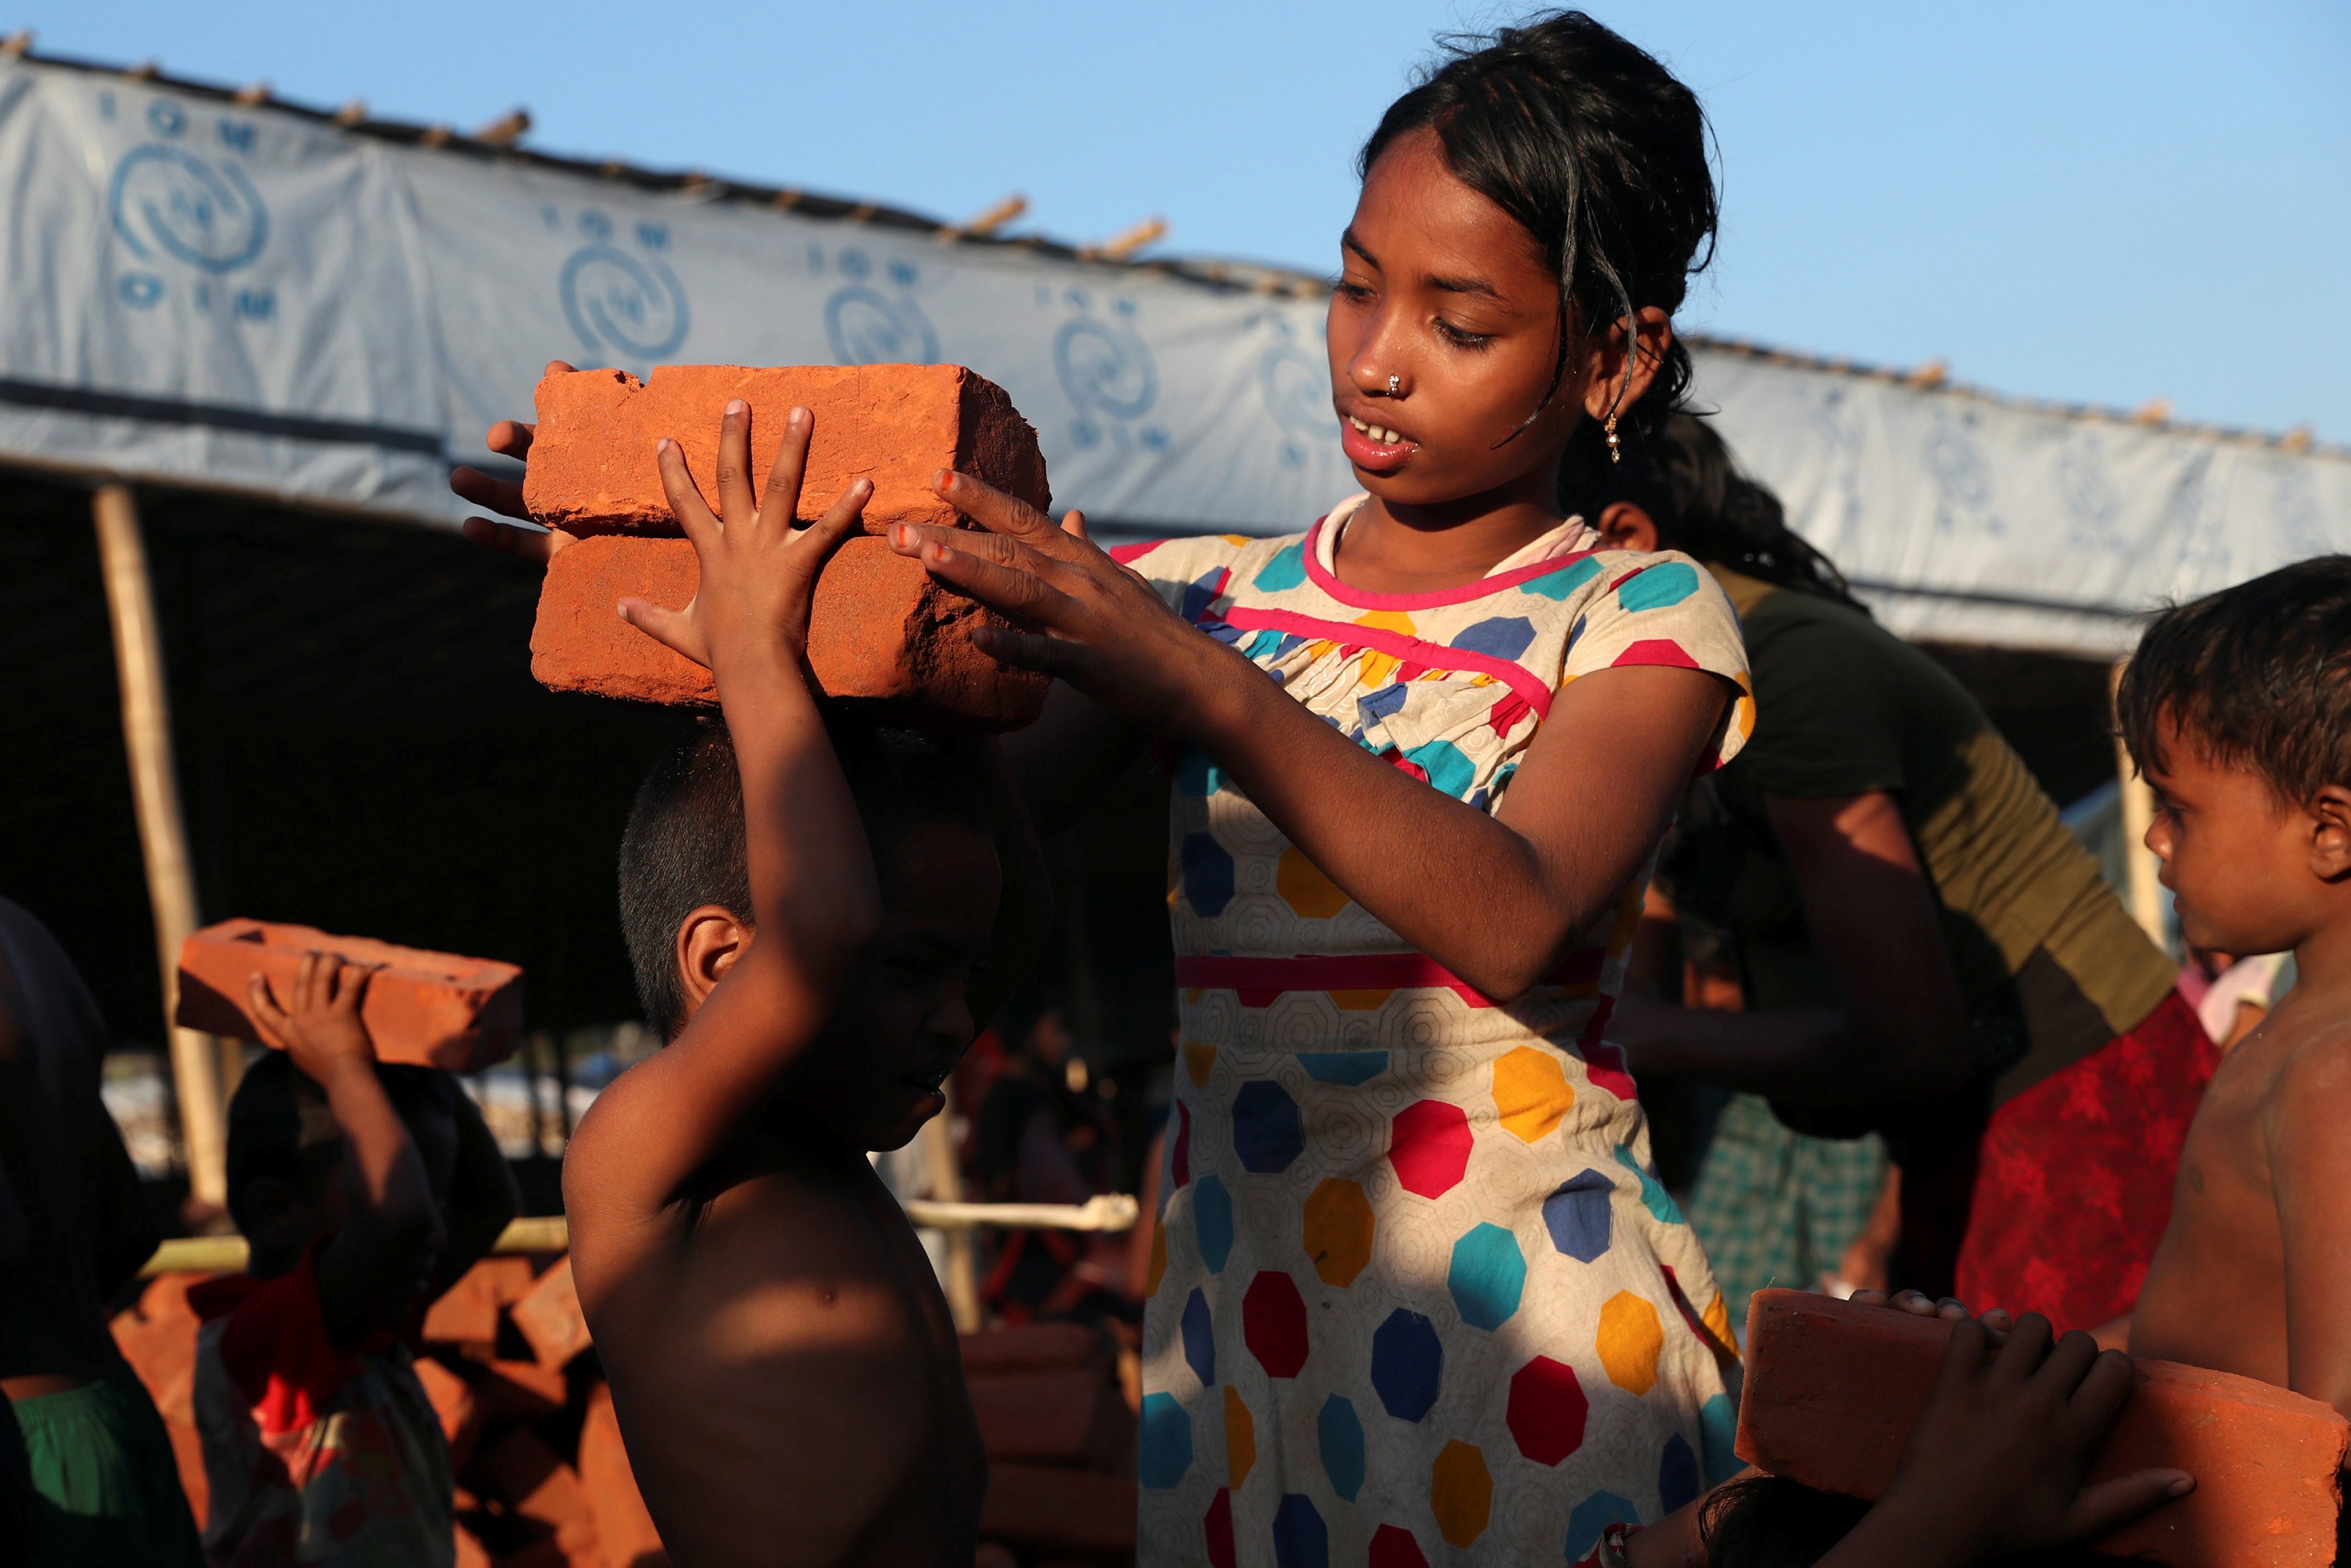 Rohingya refugee children collect bricks at the Balukhali Refugee Camp in Cox's Bazar, Bangladesh, on November 13. The UN’s International Organisation for Migration has warned that, with more than 600,000 Rohingya having fled Myanmar to Bangladesh since August, the refugees are at the mercy of human traffickers in the area. Photo: Reuters